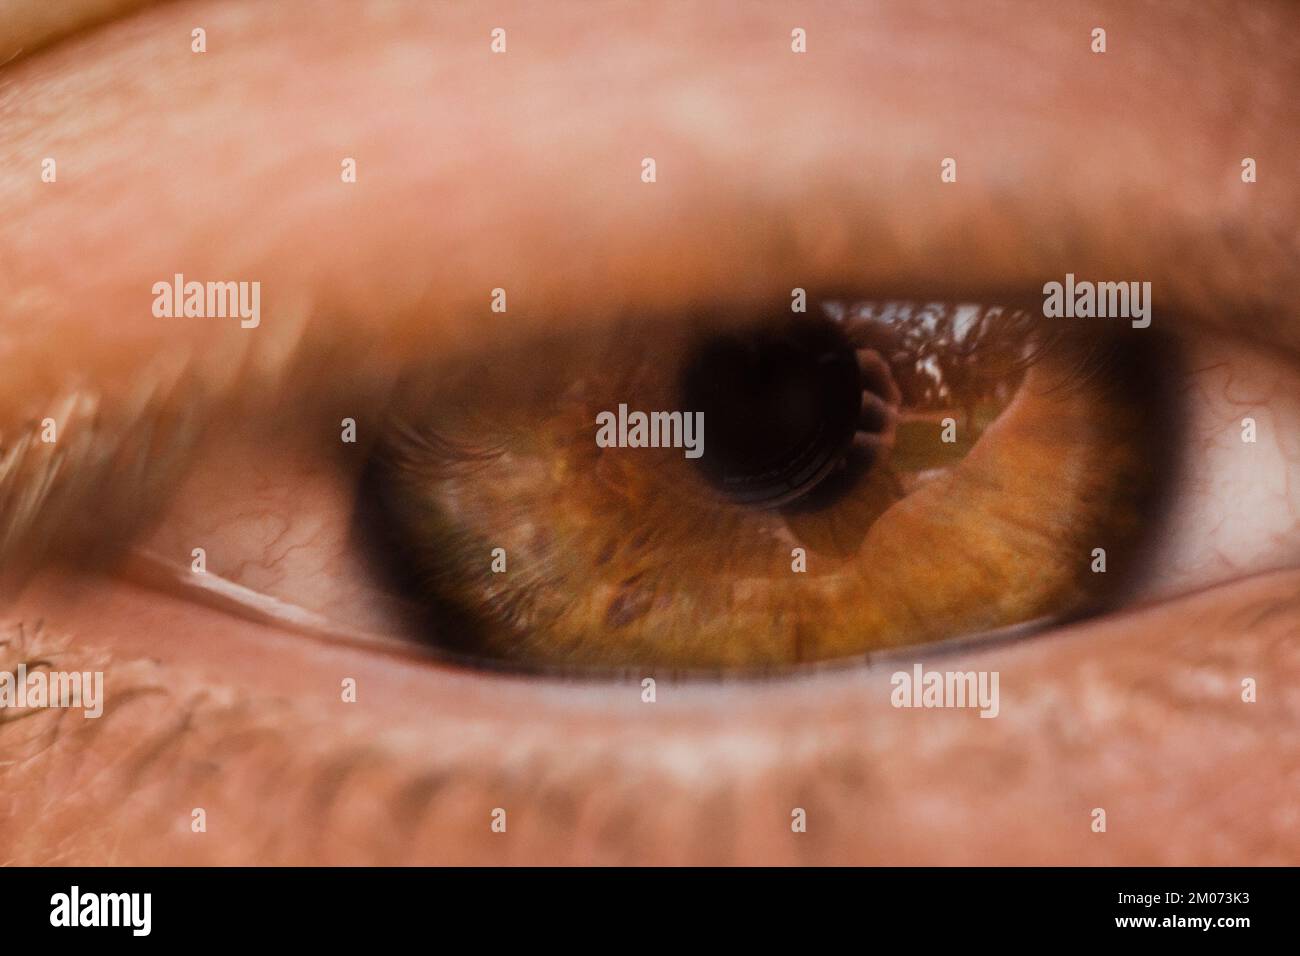 male eye close up. man looks into the frame. brown iris in macro. Stock Photo